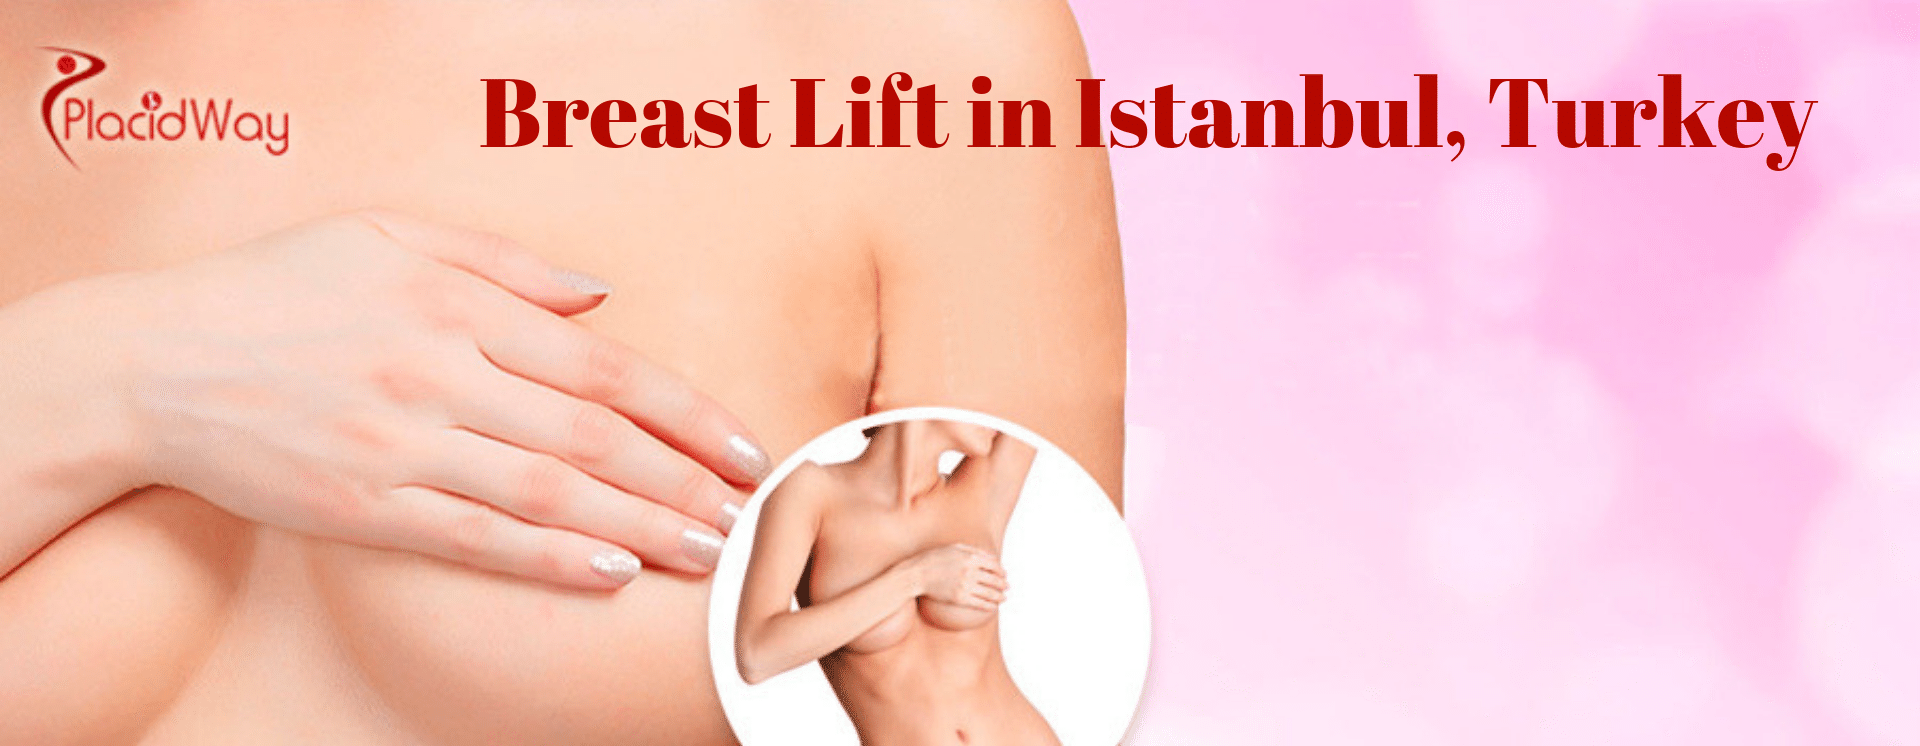 Most Popular Package for Breast Lift in Istanbul, Turkey